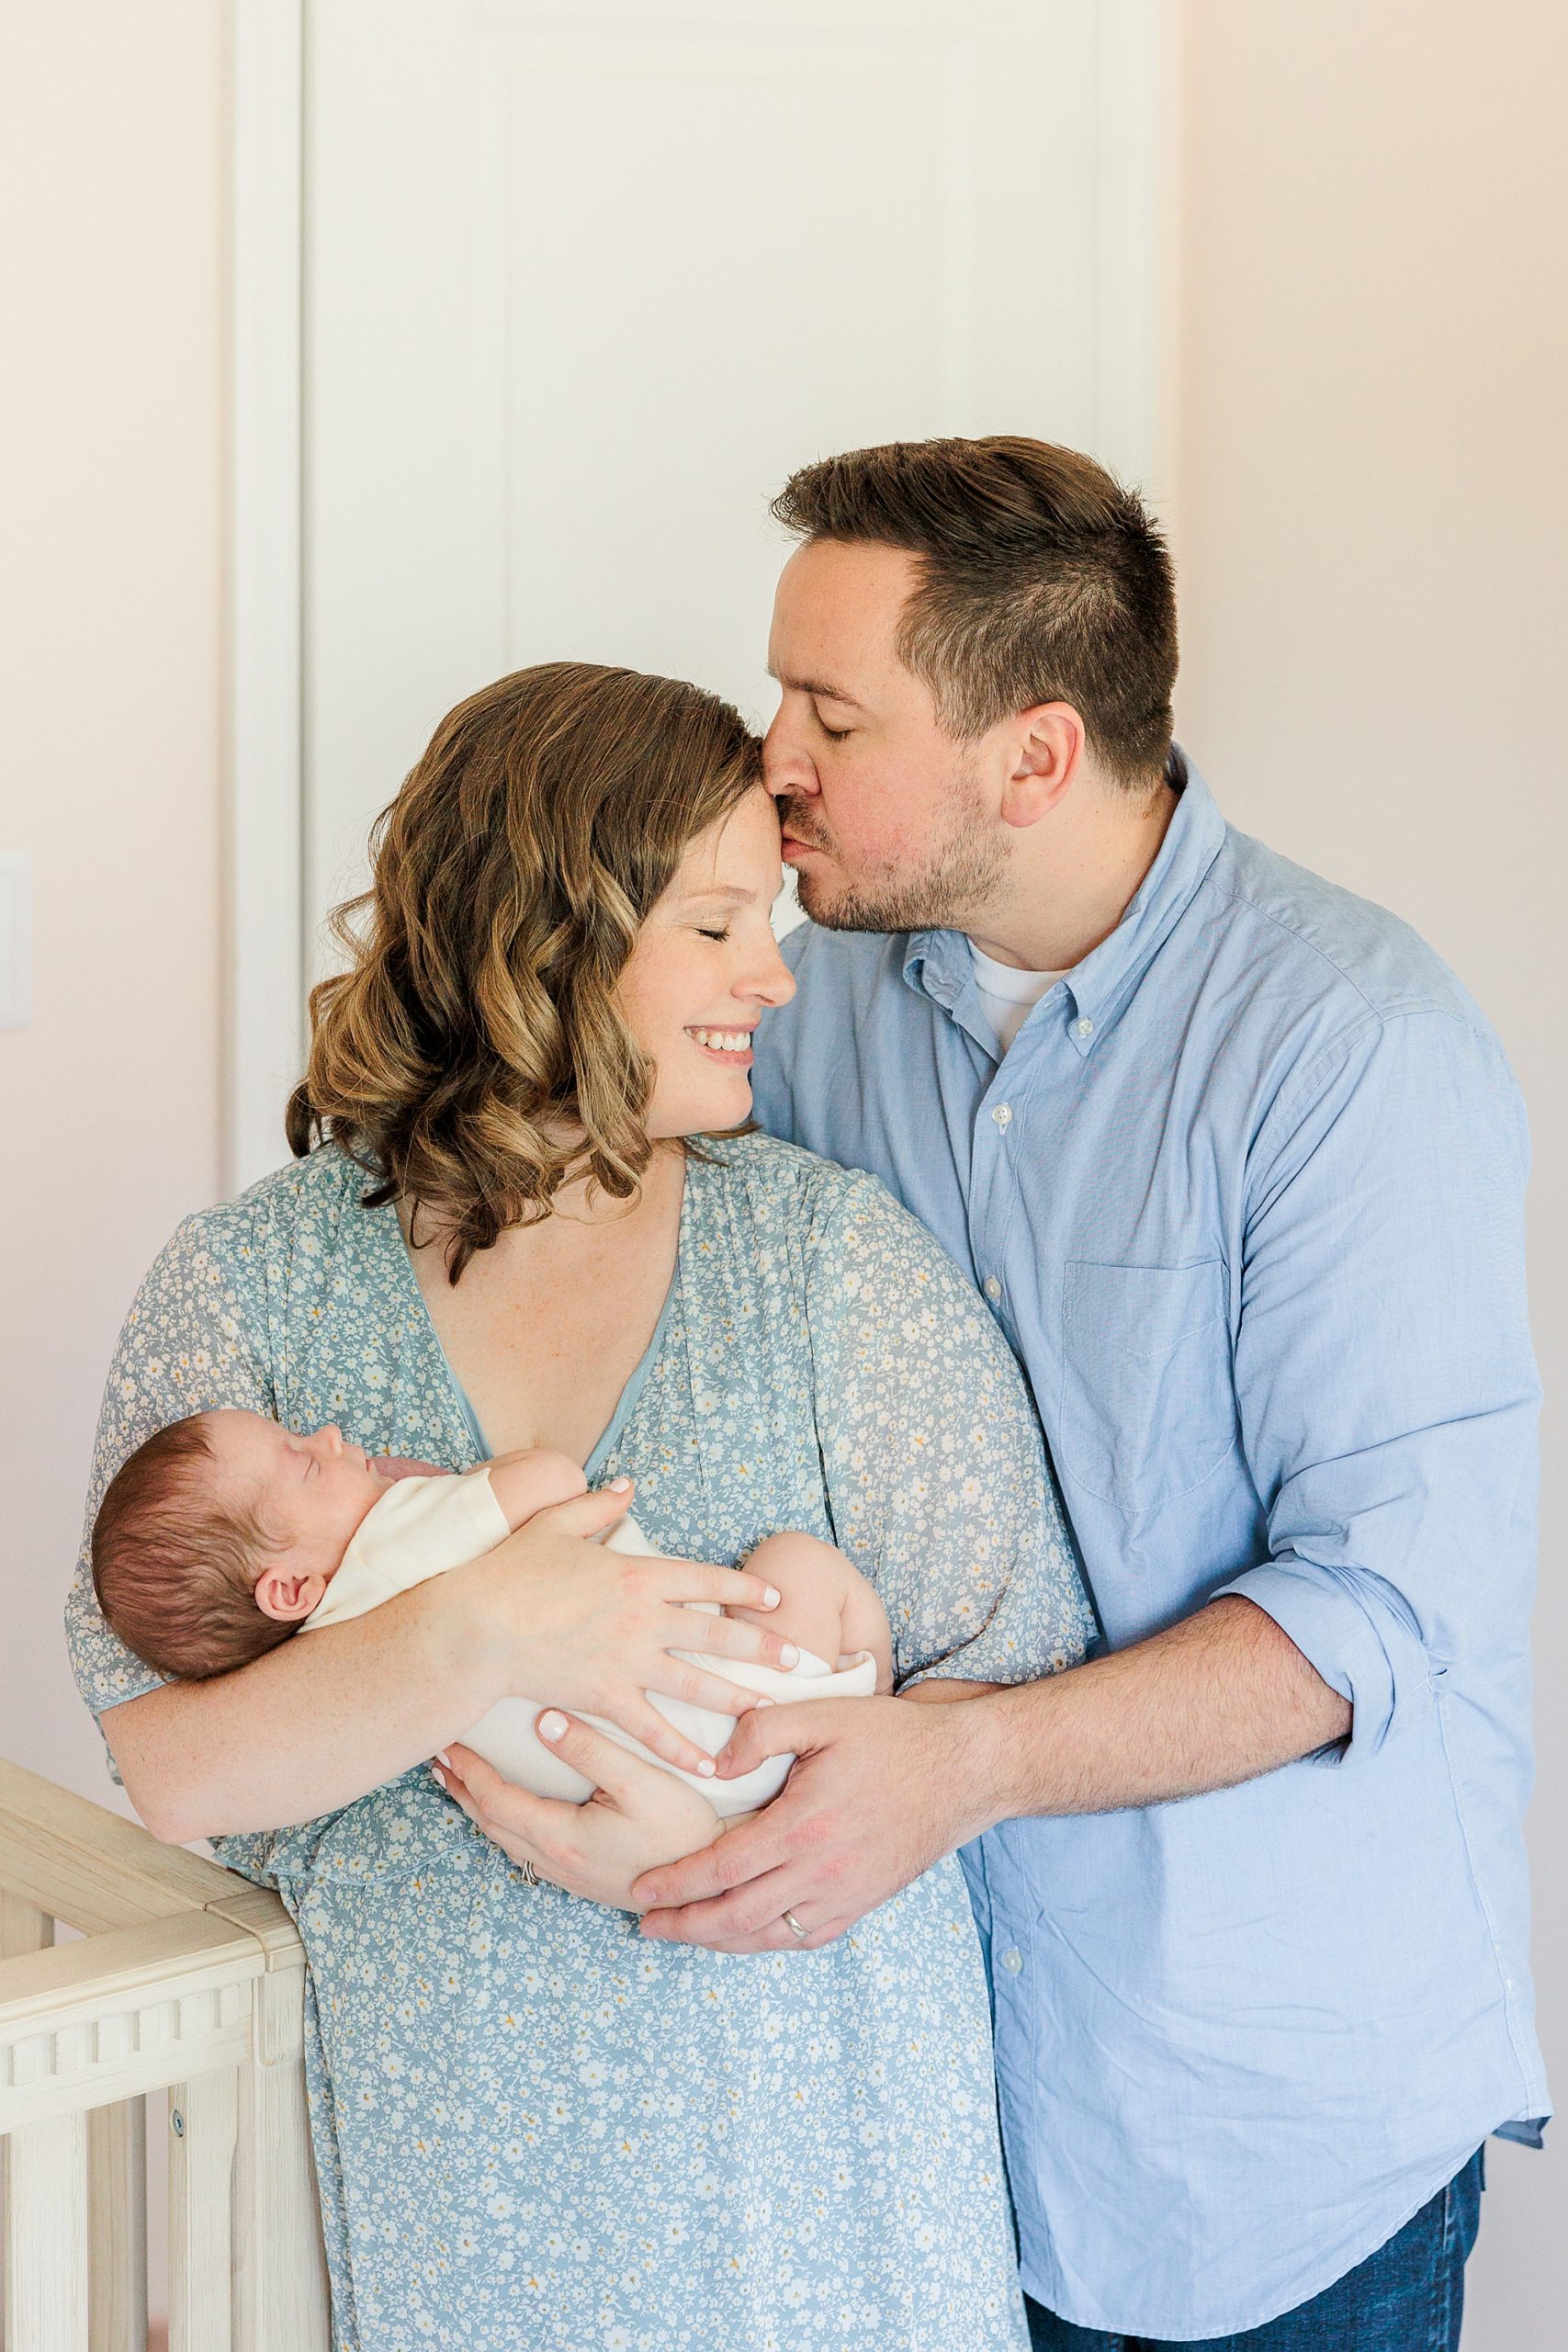 dad kisses mom's forehead during lifestyle newborn session at home